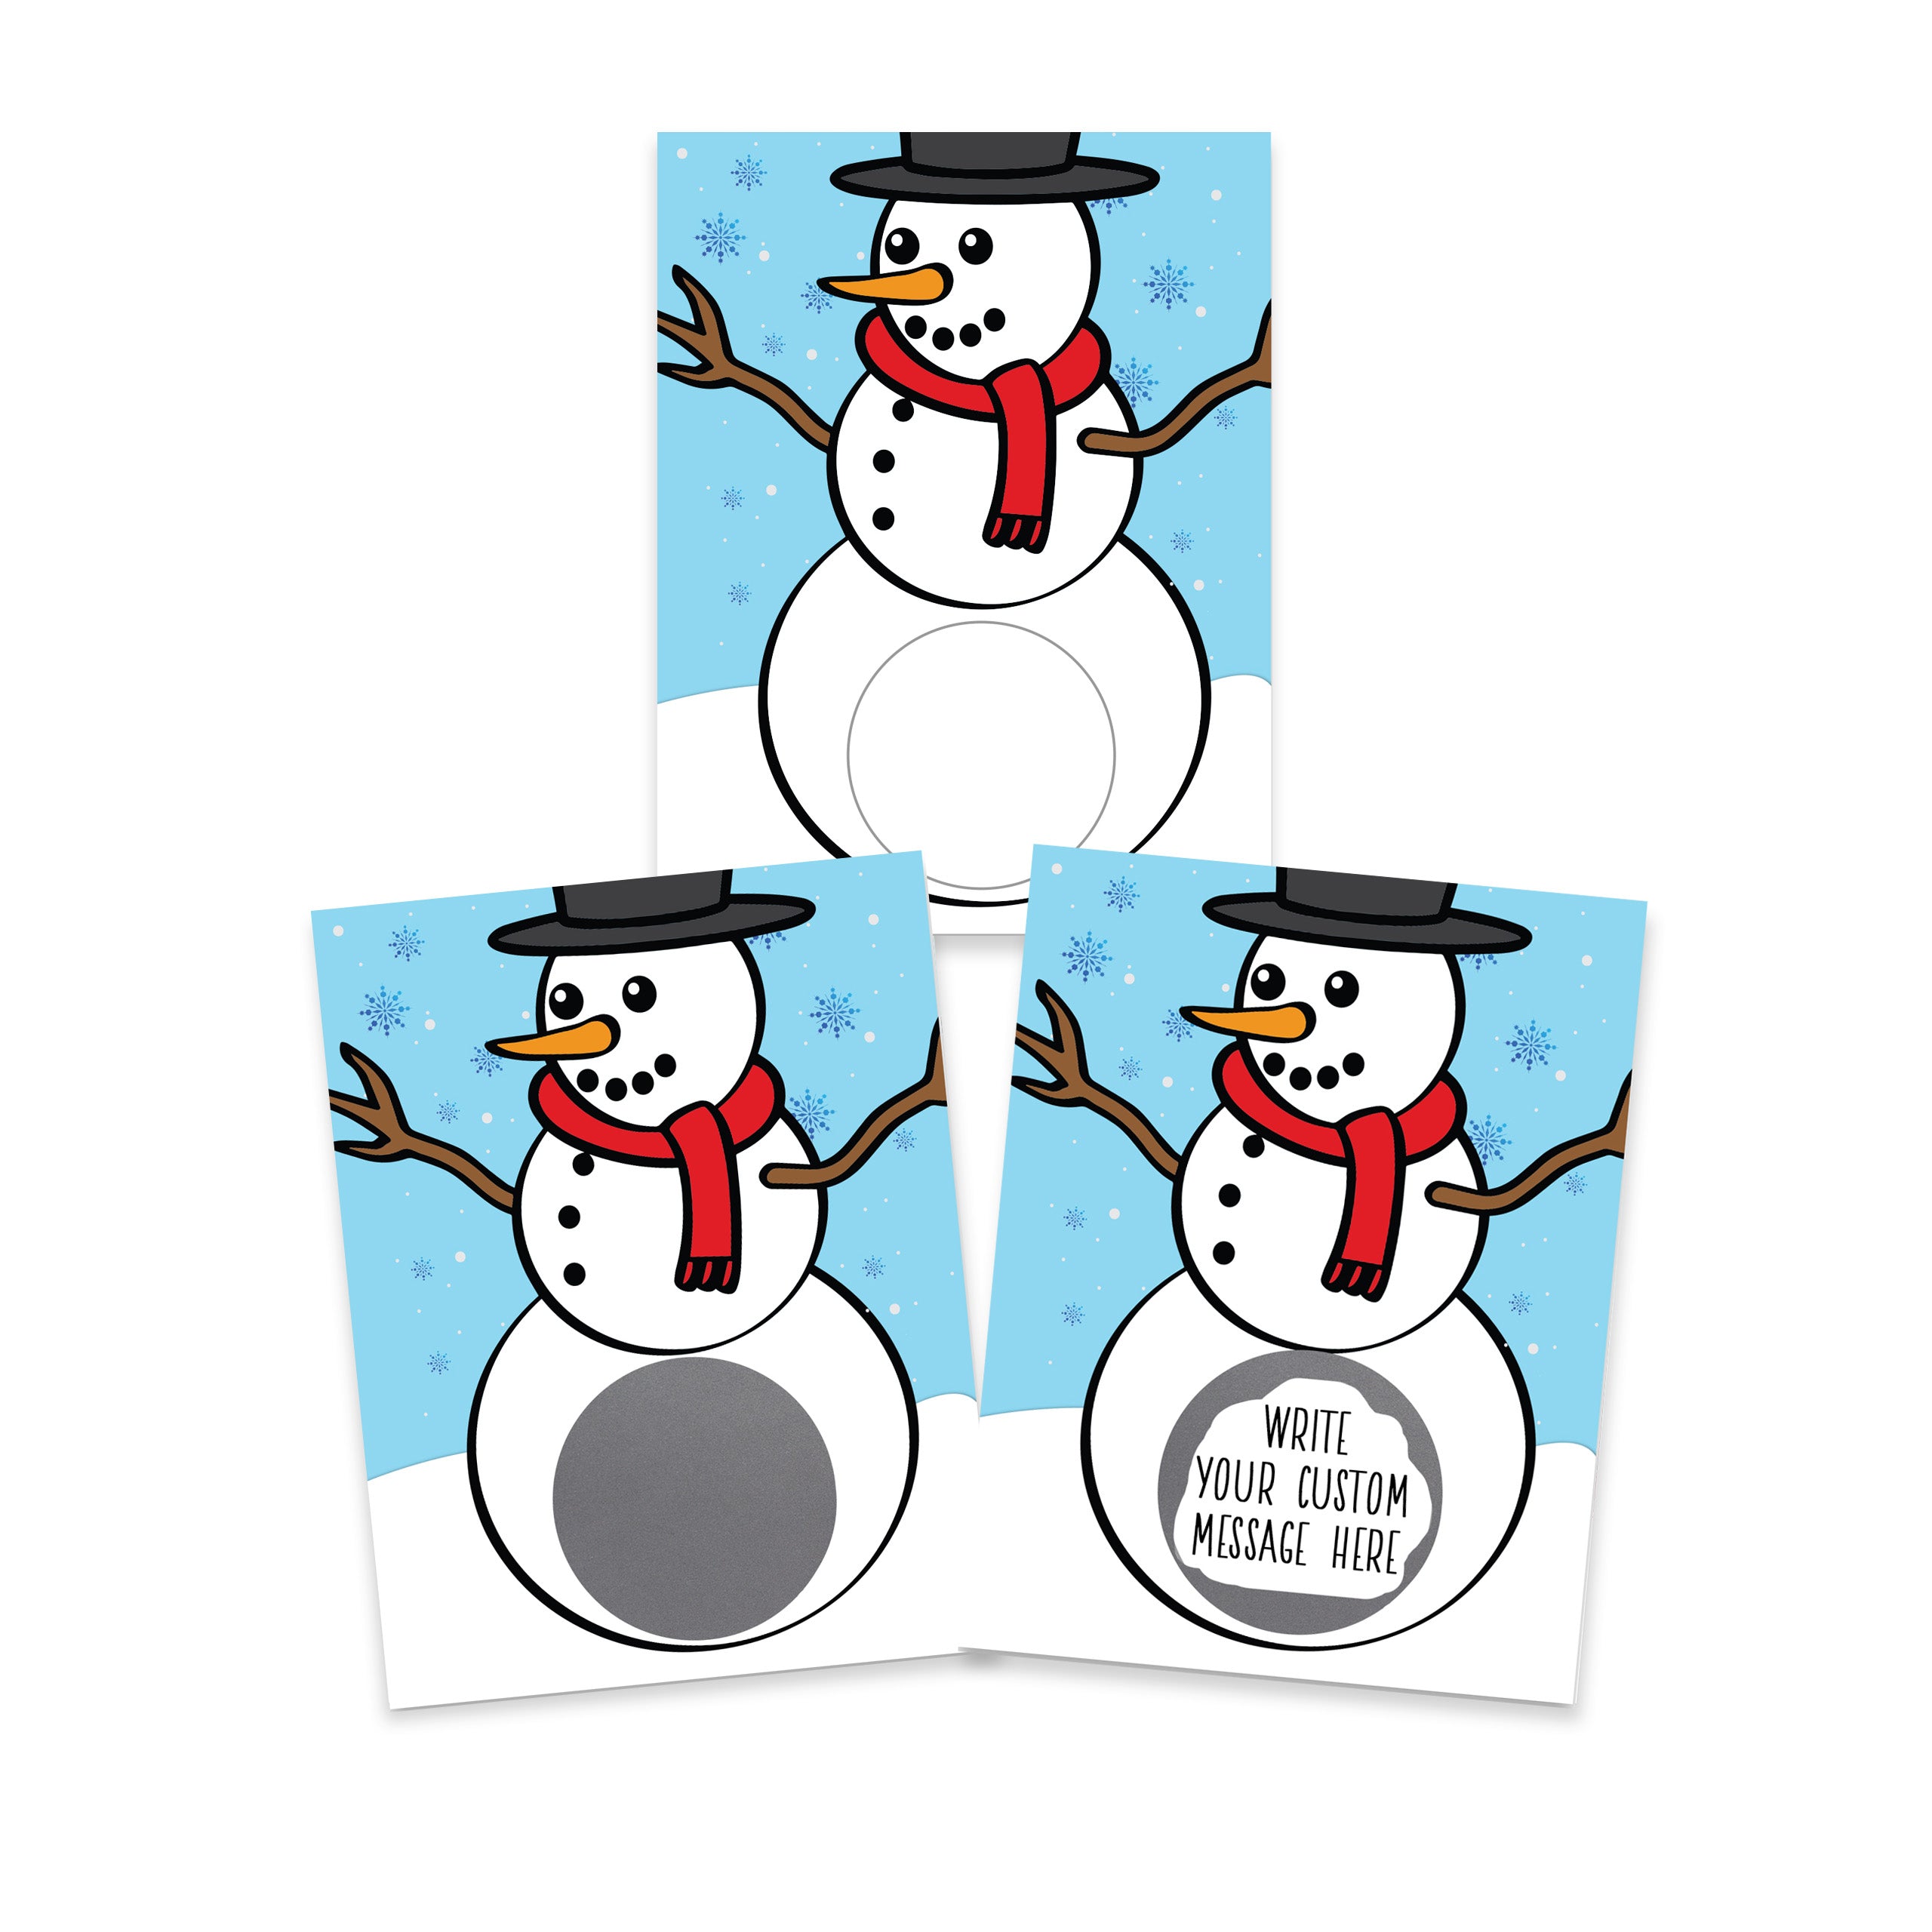 DIY Snowman Make Your Own Scratch Off Cards - 20 Cards and 20 Scratch Off Stickers - My Scratch Offs